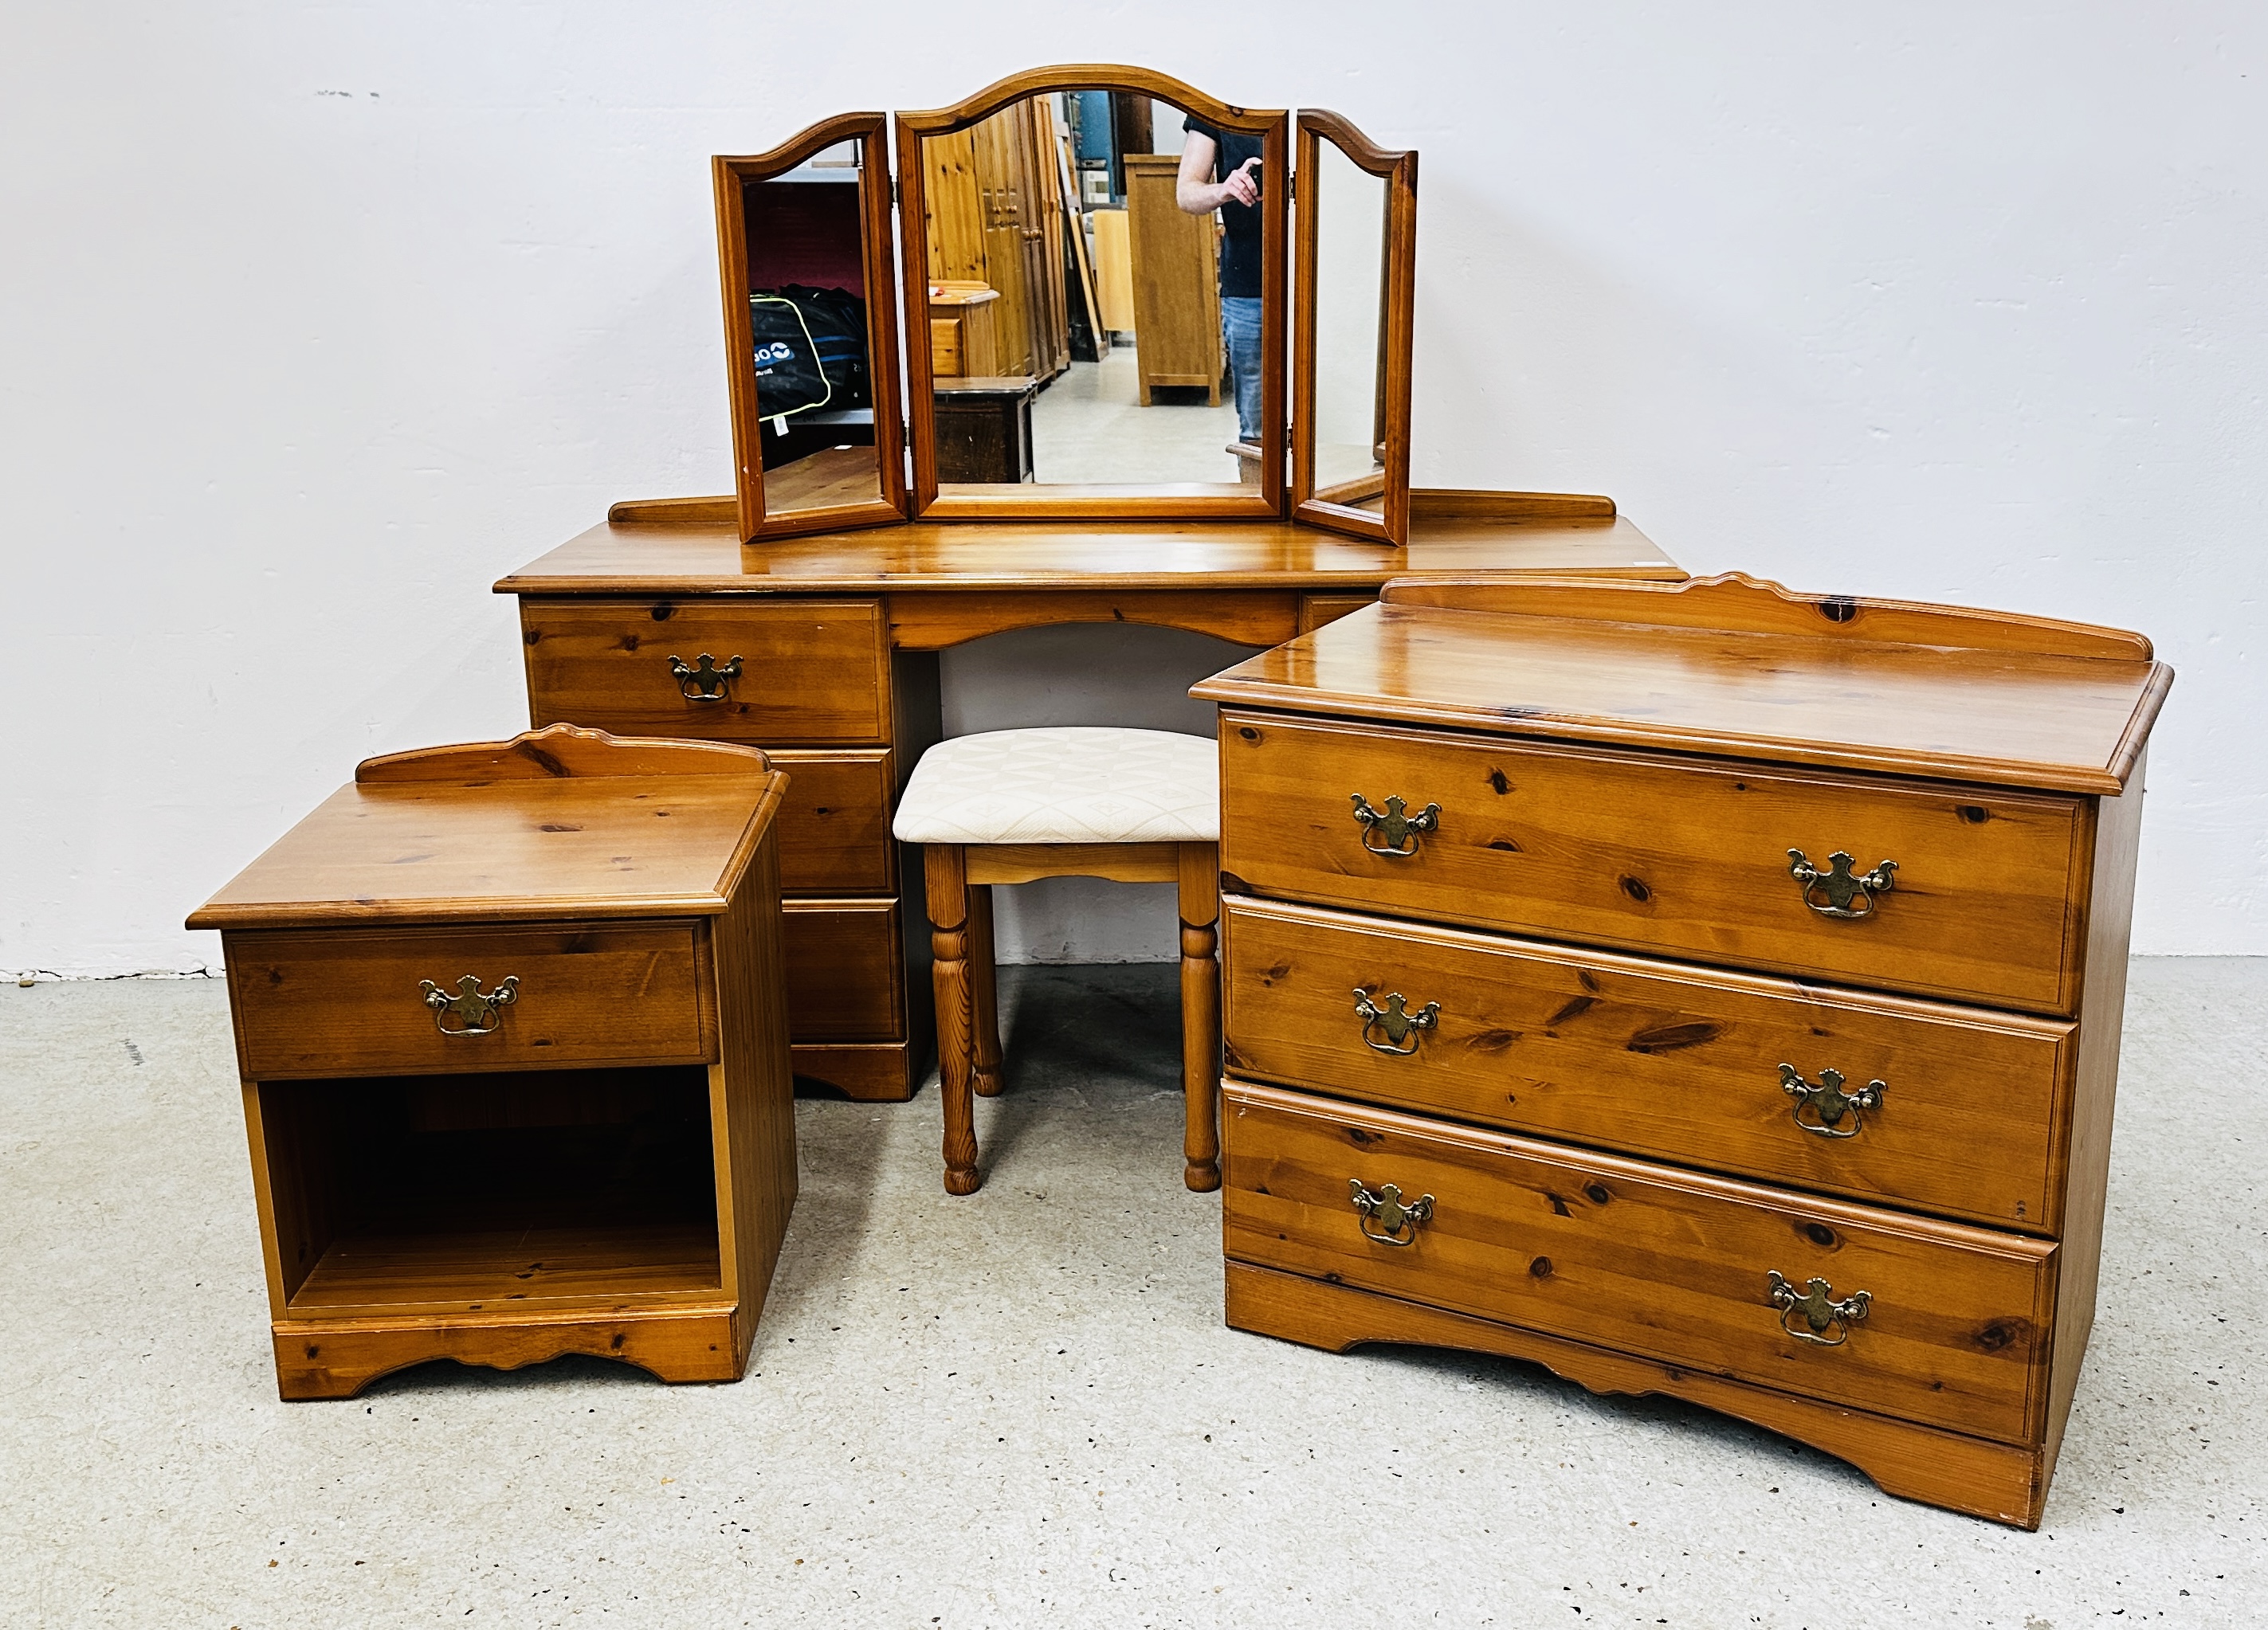 A HONEY PINE 6 DRAWER DRESSING TABLE WITH 3 FOLD MIRROR AND STOOL W 143 X D 44 X H 75CM,